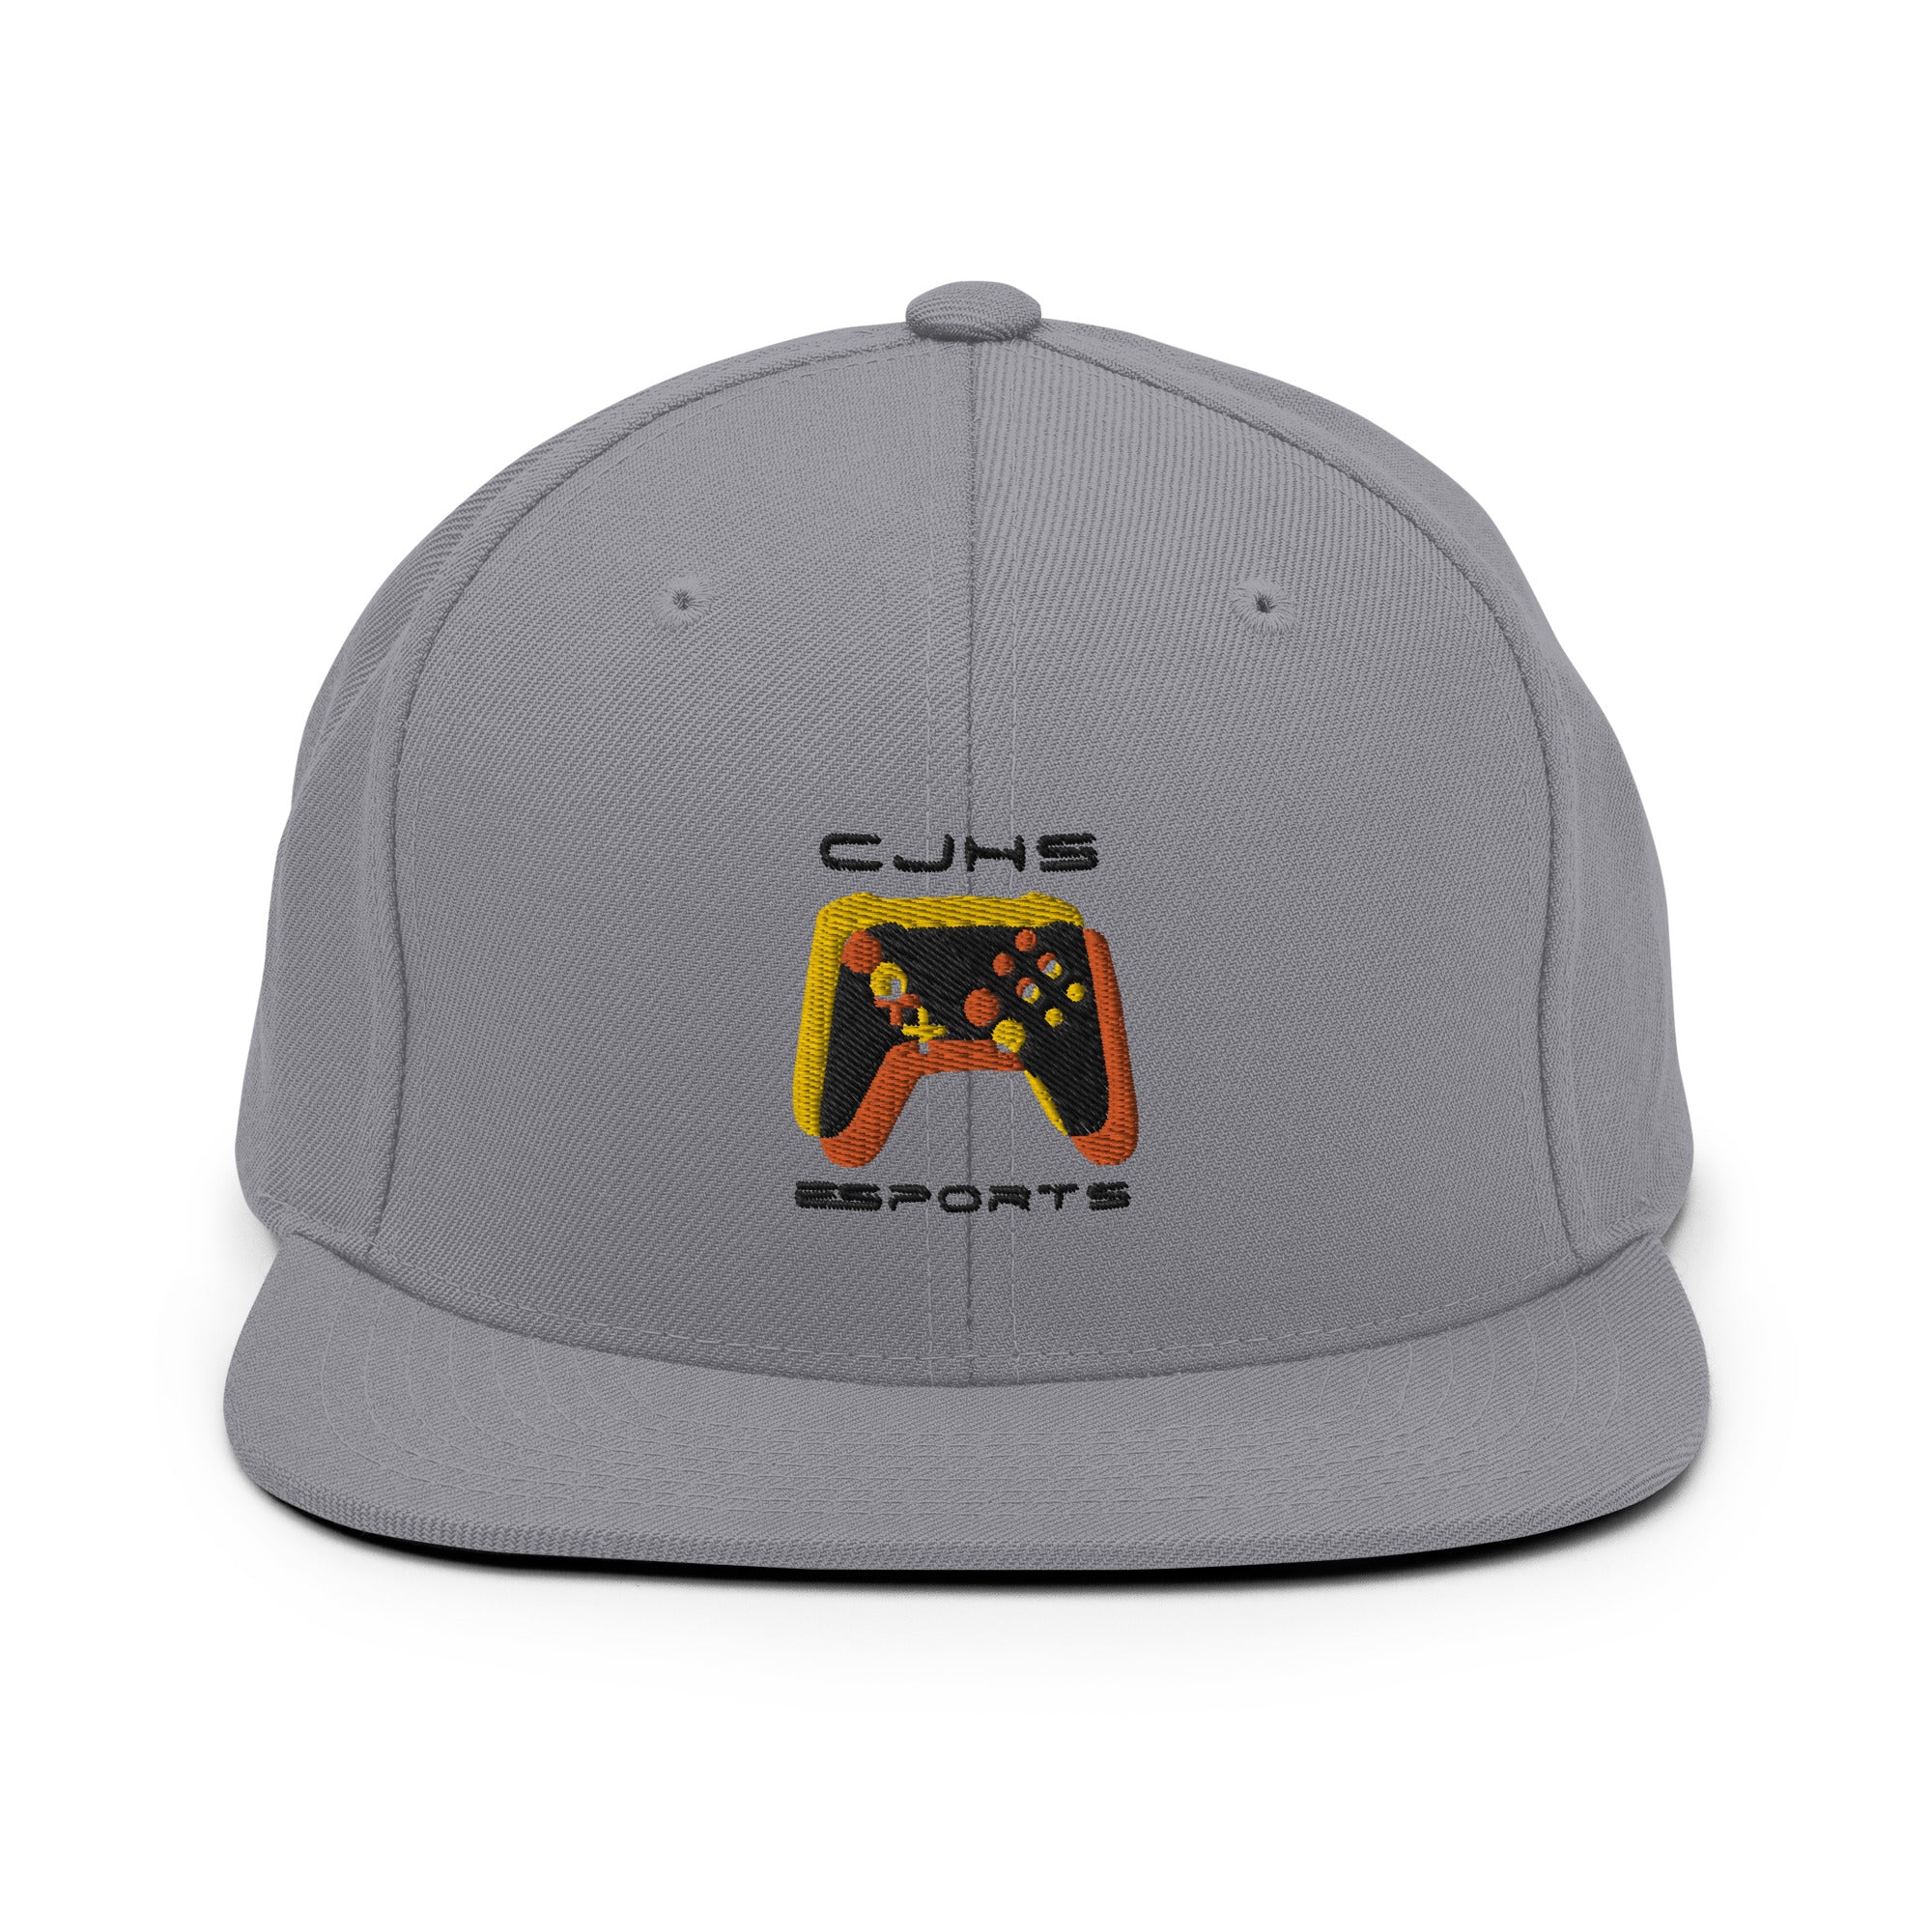 Cape Central Junior High | On Demand | Embroidered Snapback Hat